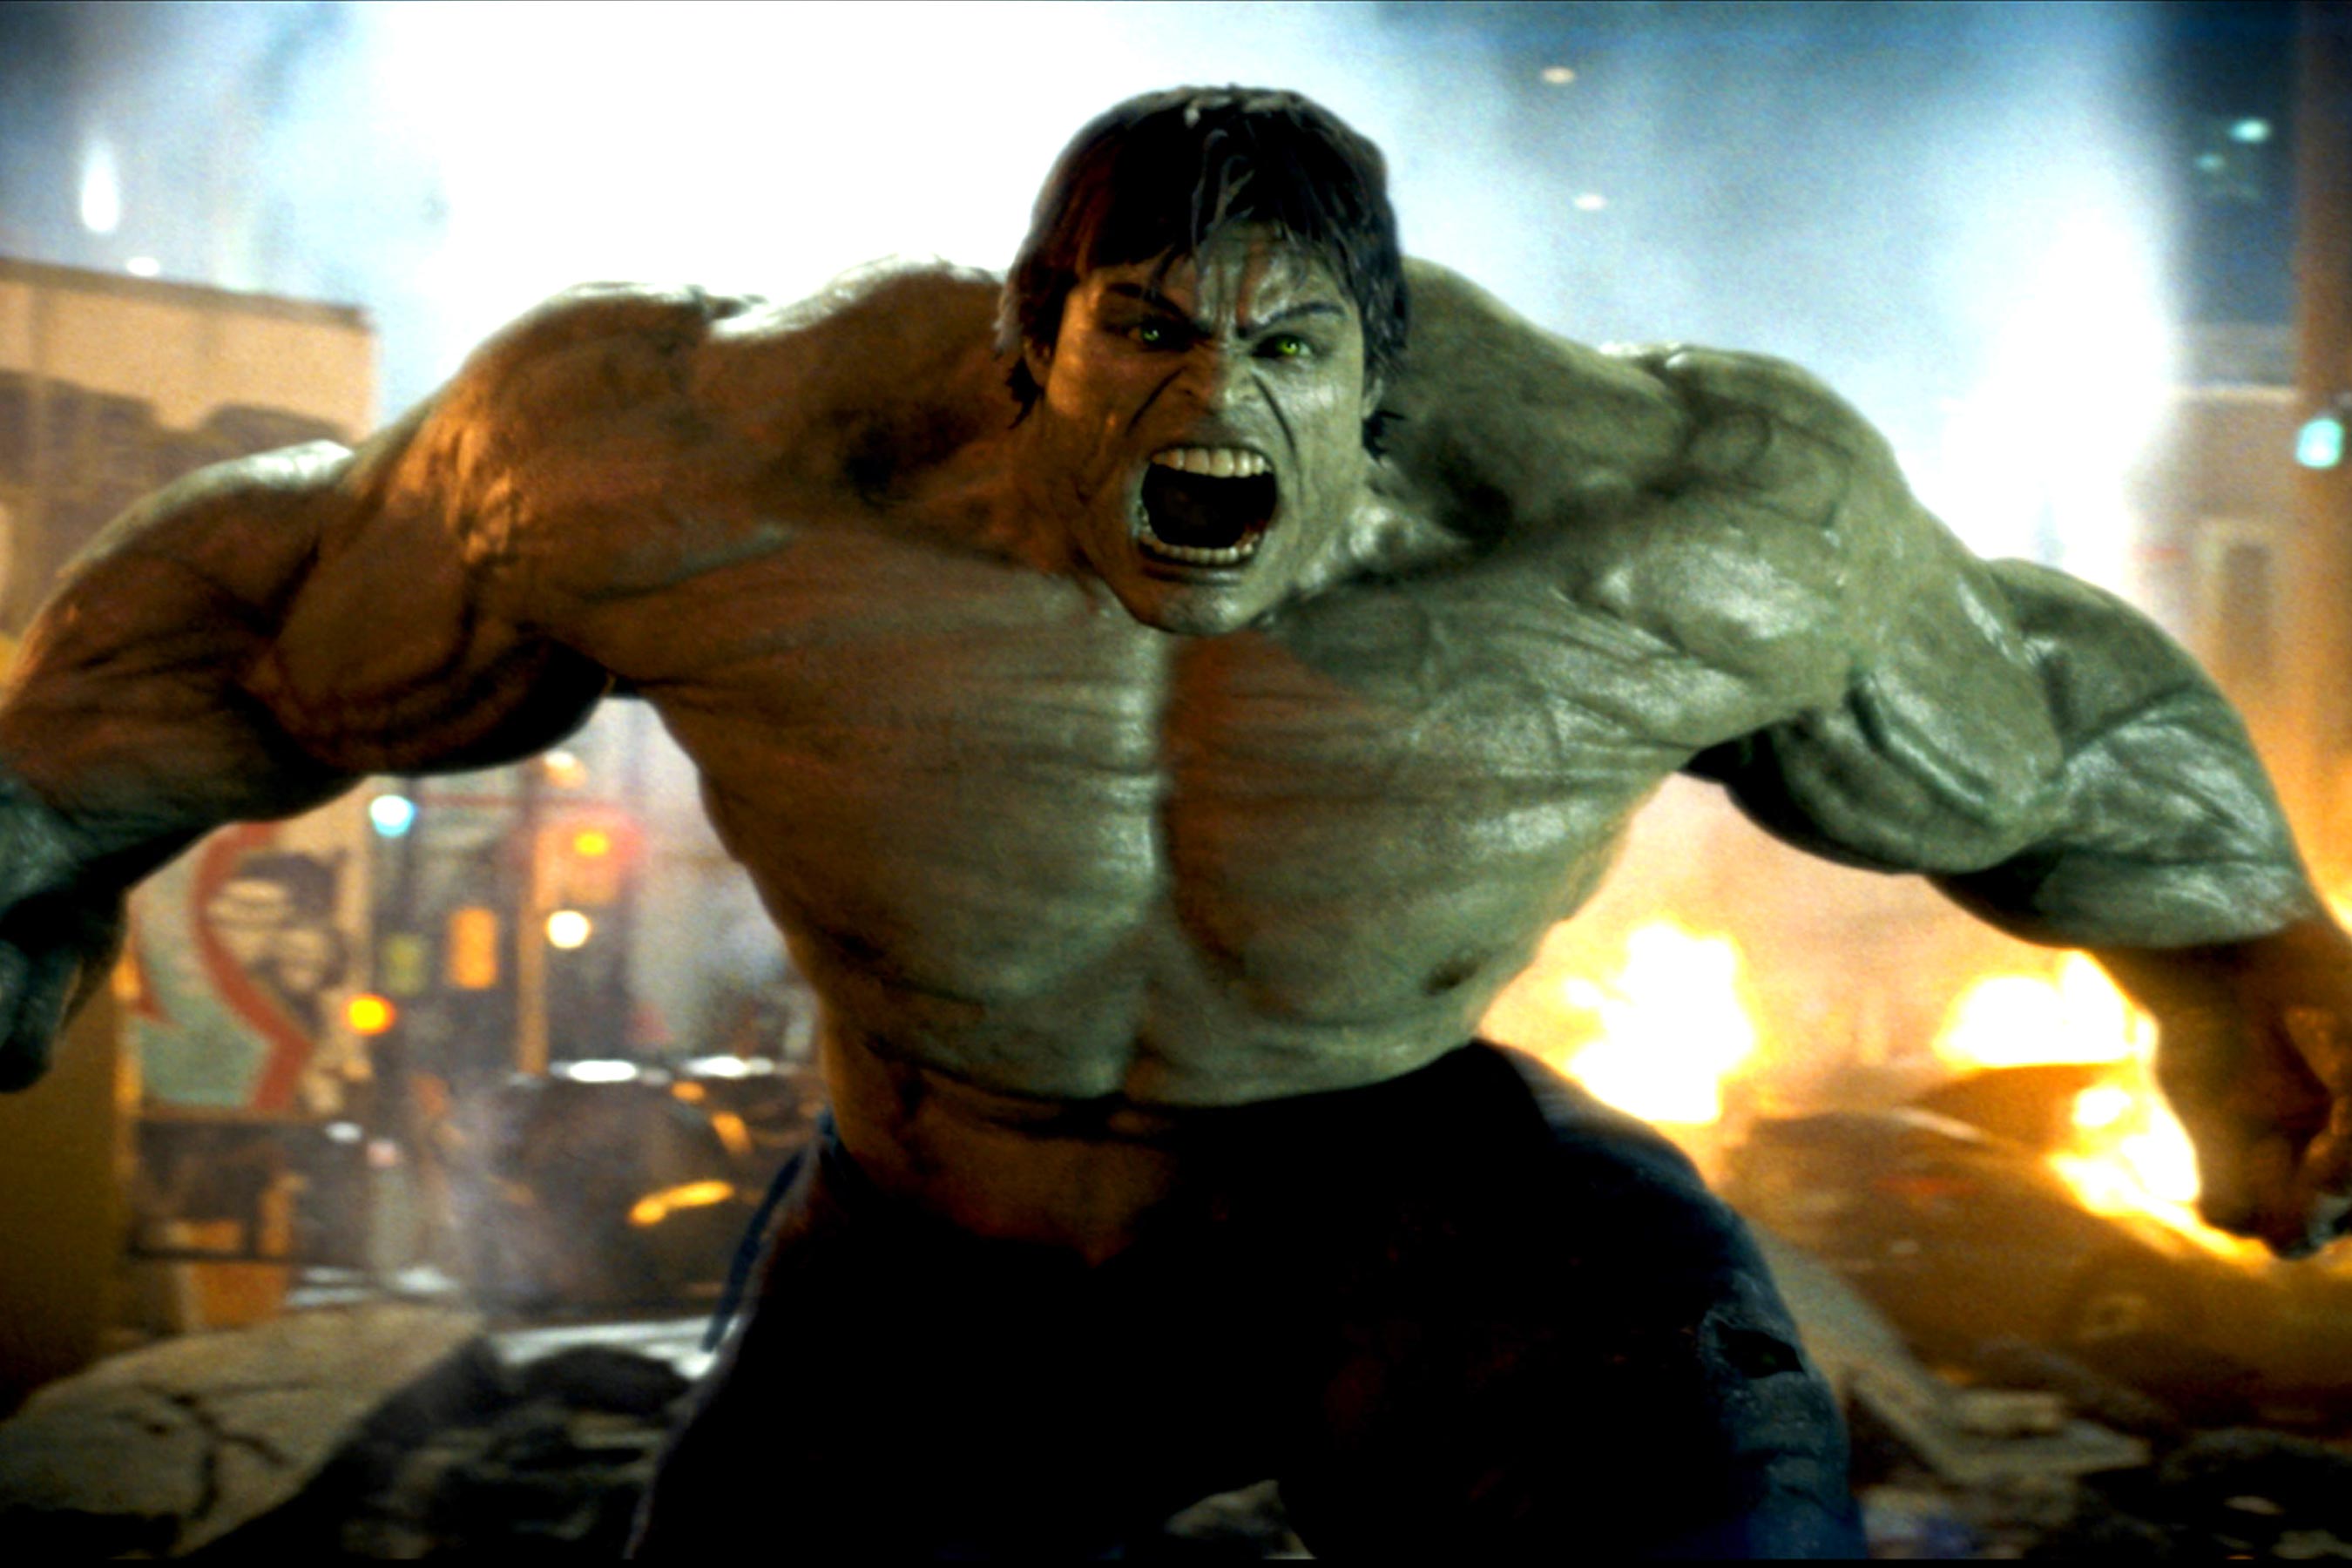 Which Avenger Are You? The Incredible Hulk (2008)